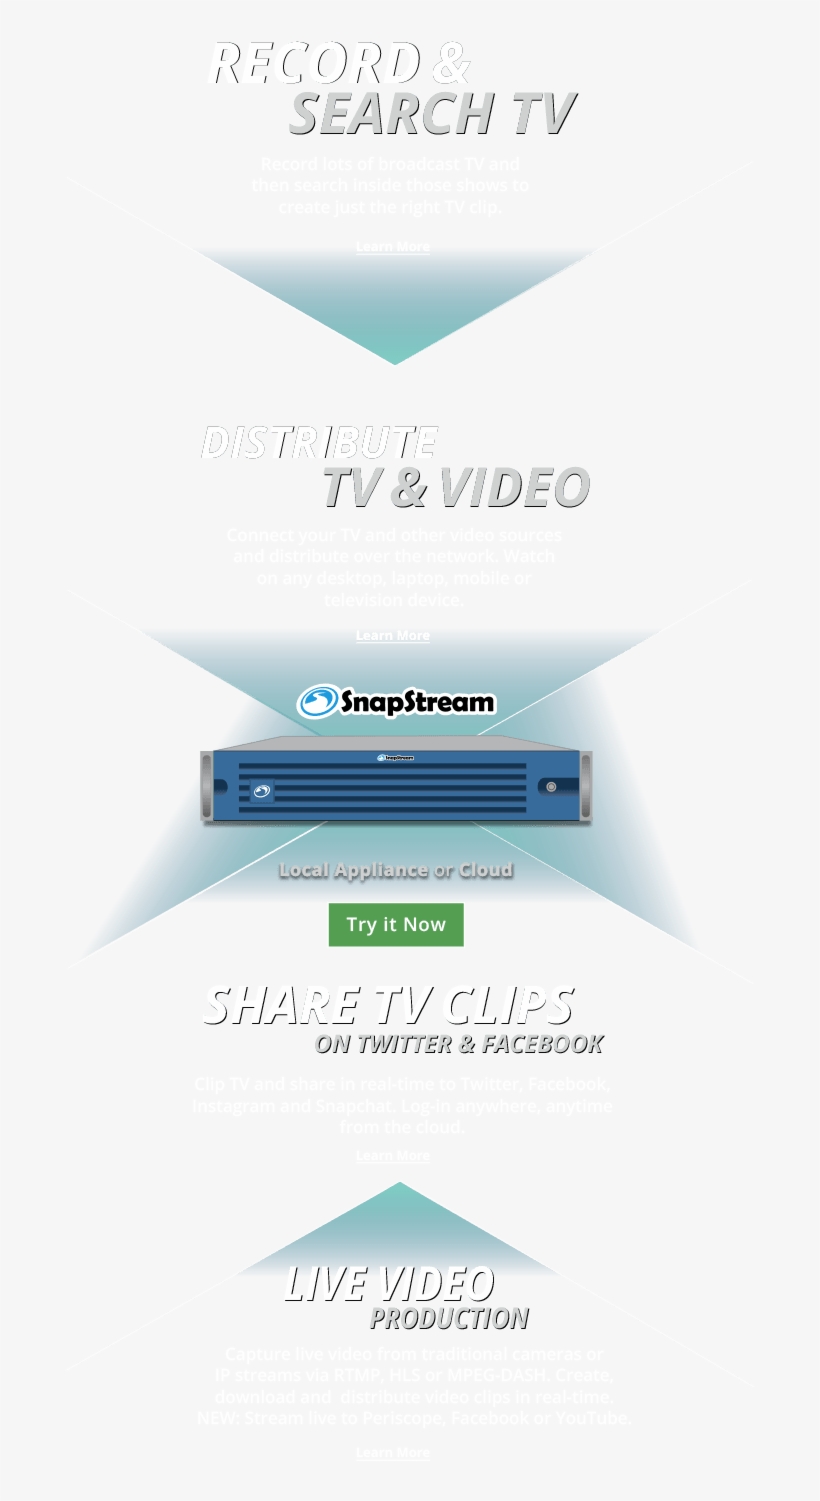 The Dvr For Business, Share Tv Clips On Twitter & Facebook, - Graphic Design, transparent png #3378839